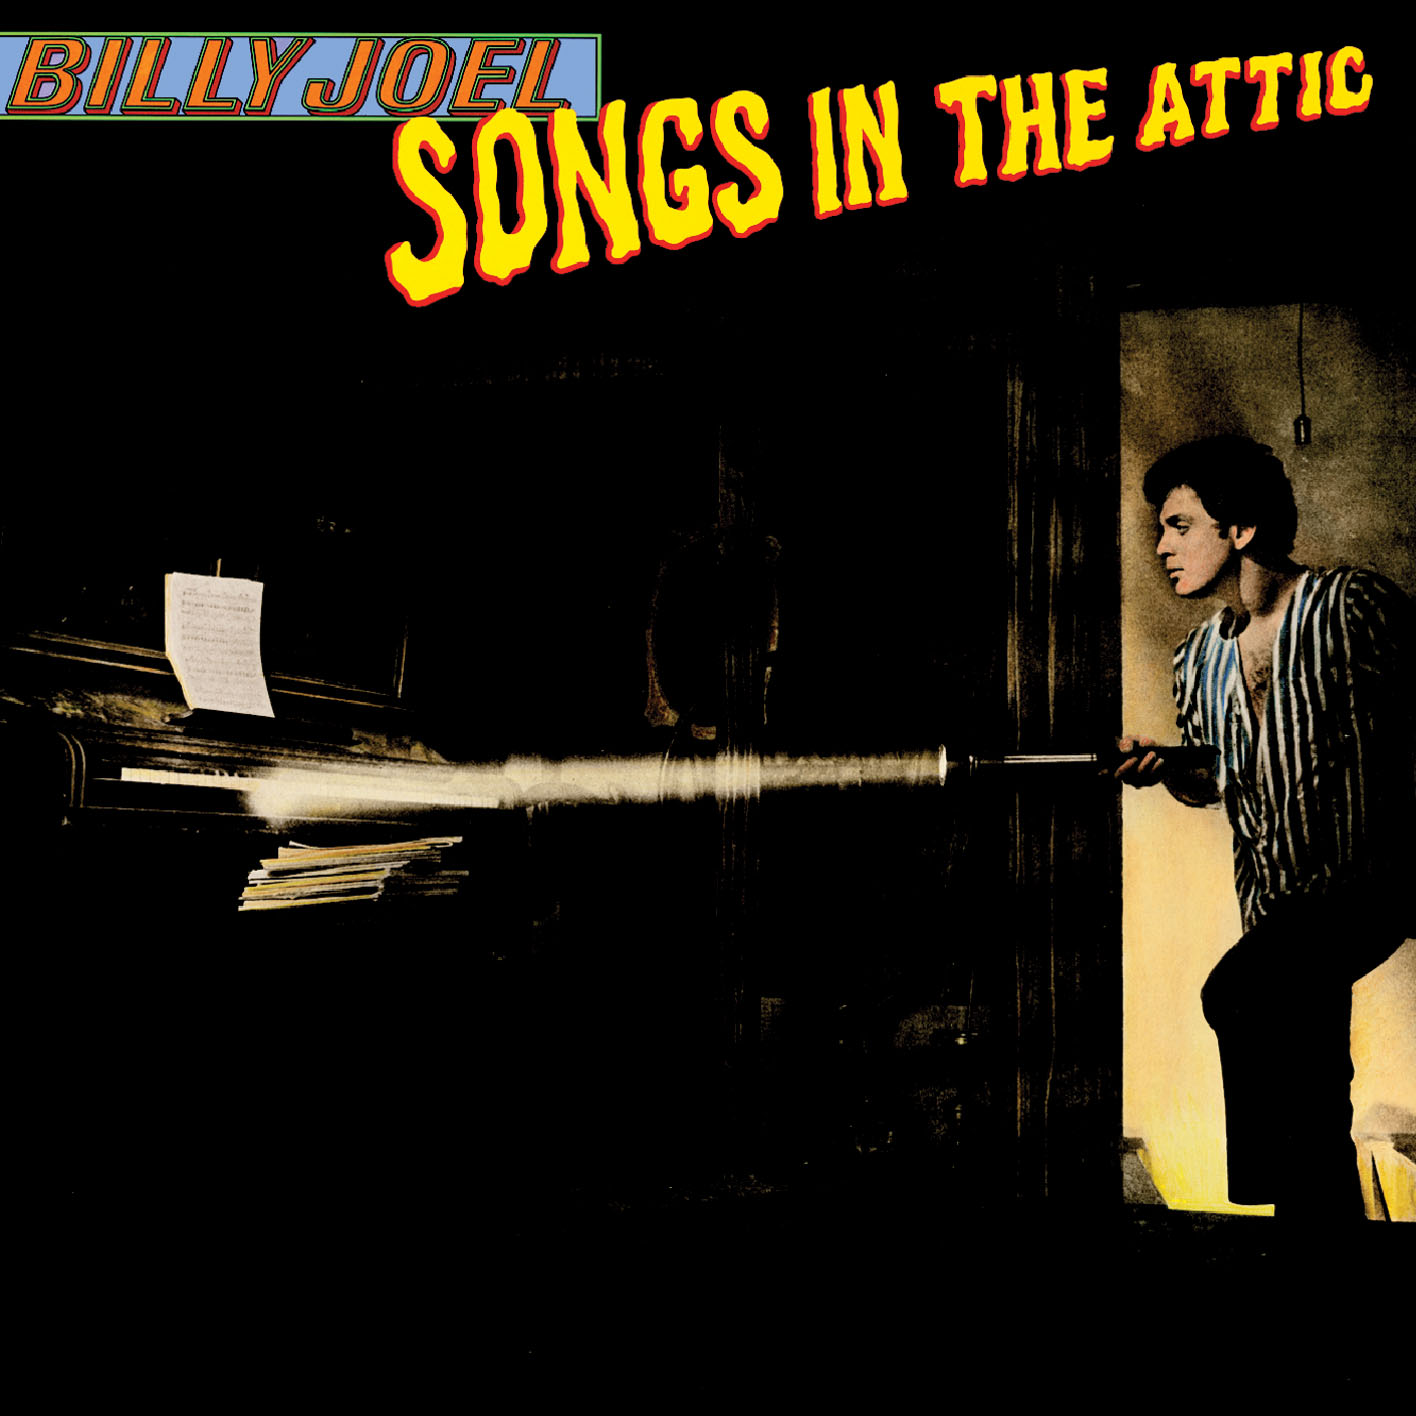 Songs In The Attic